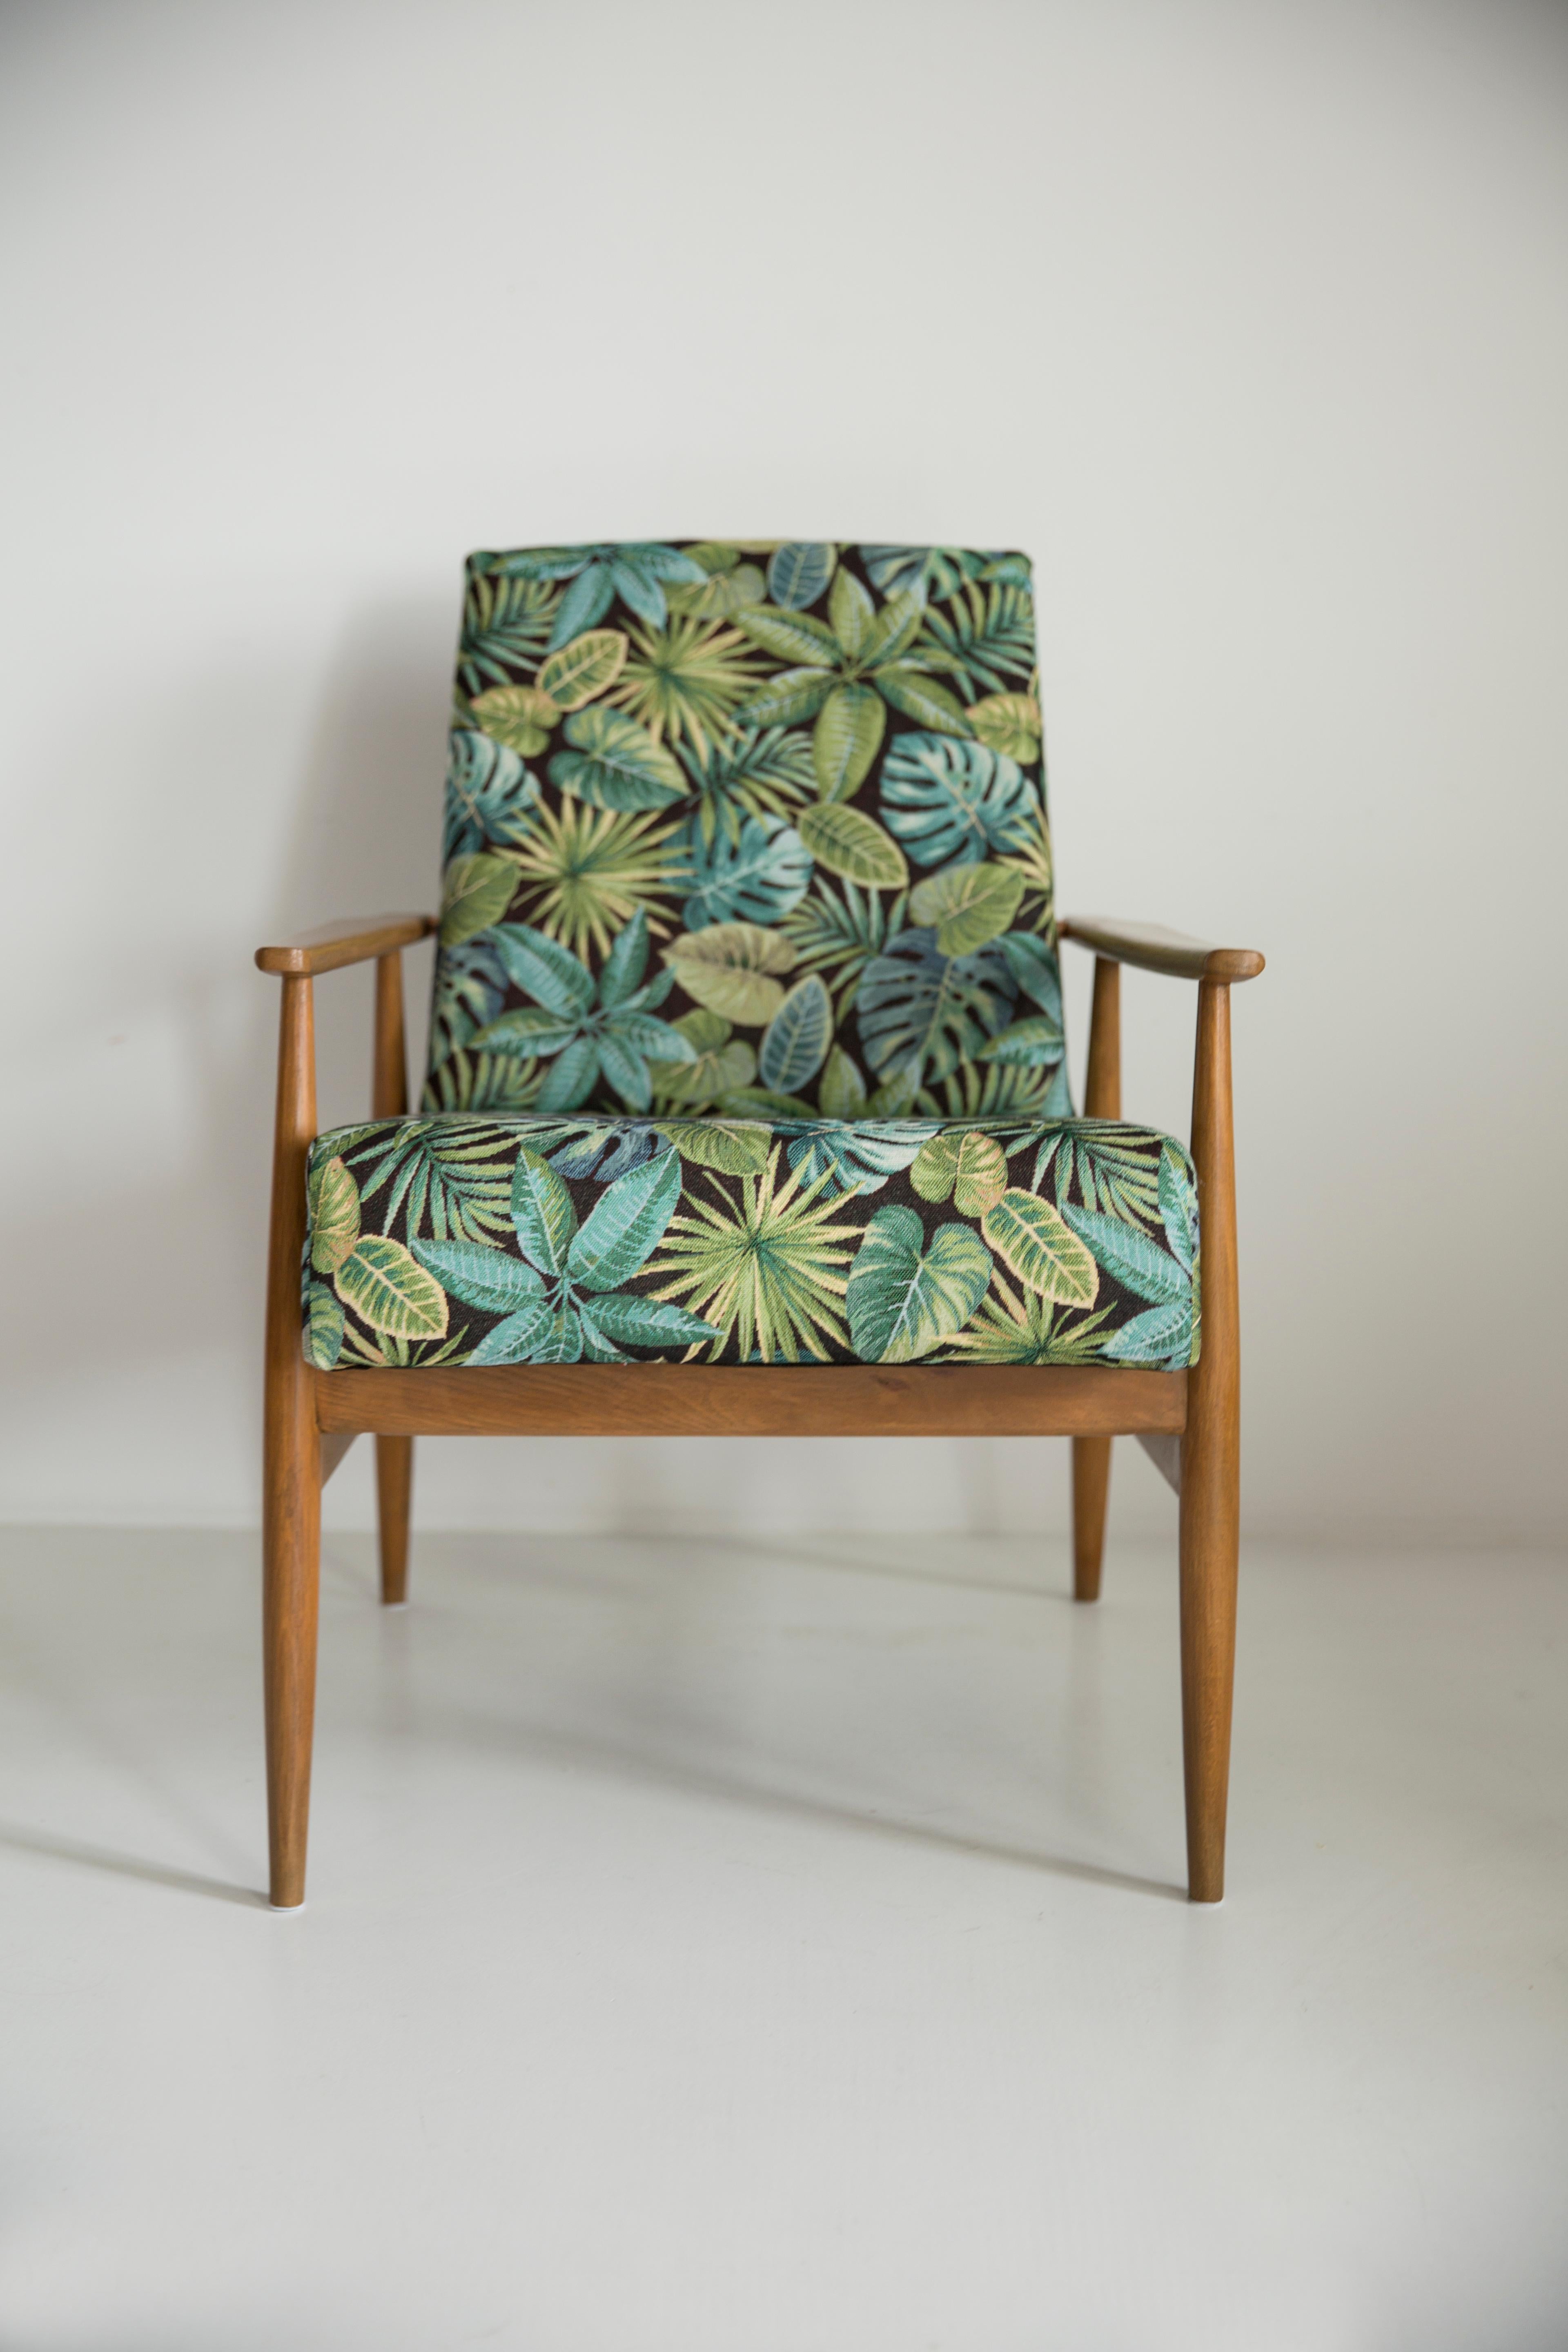 Polish Pair of Mid-Century Green Leaves Jacquard Dante Armchairs, H. Lis, 1960s For Sale